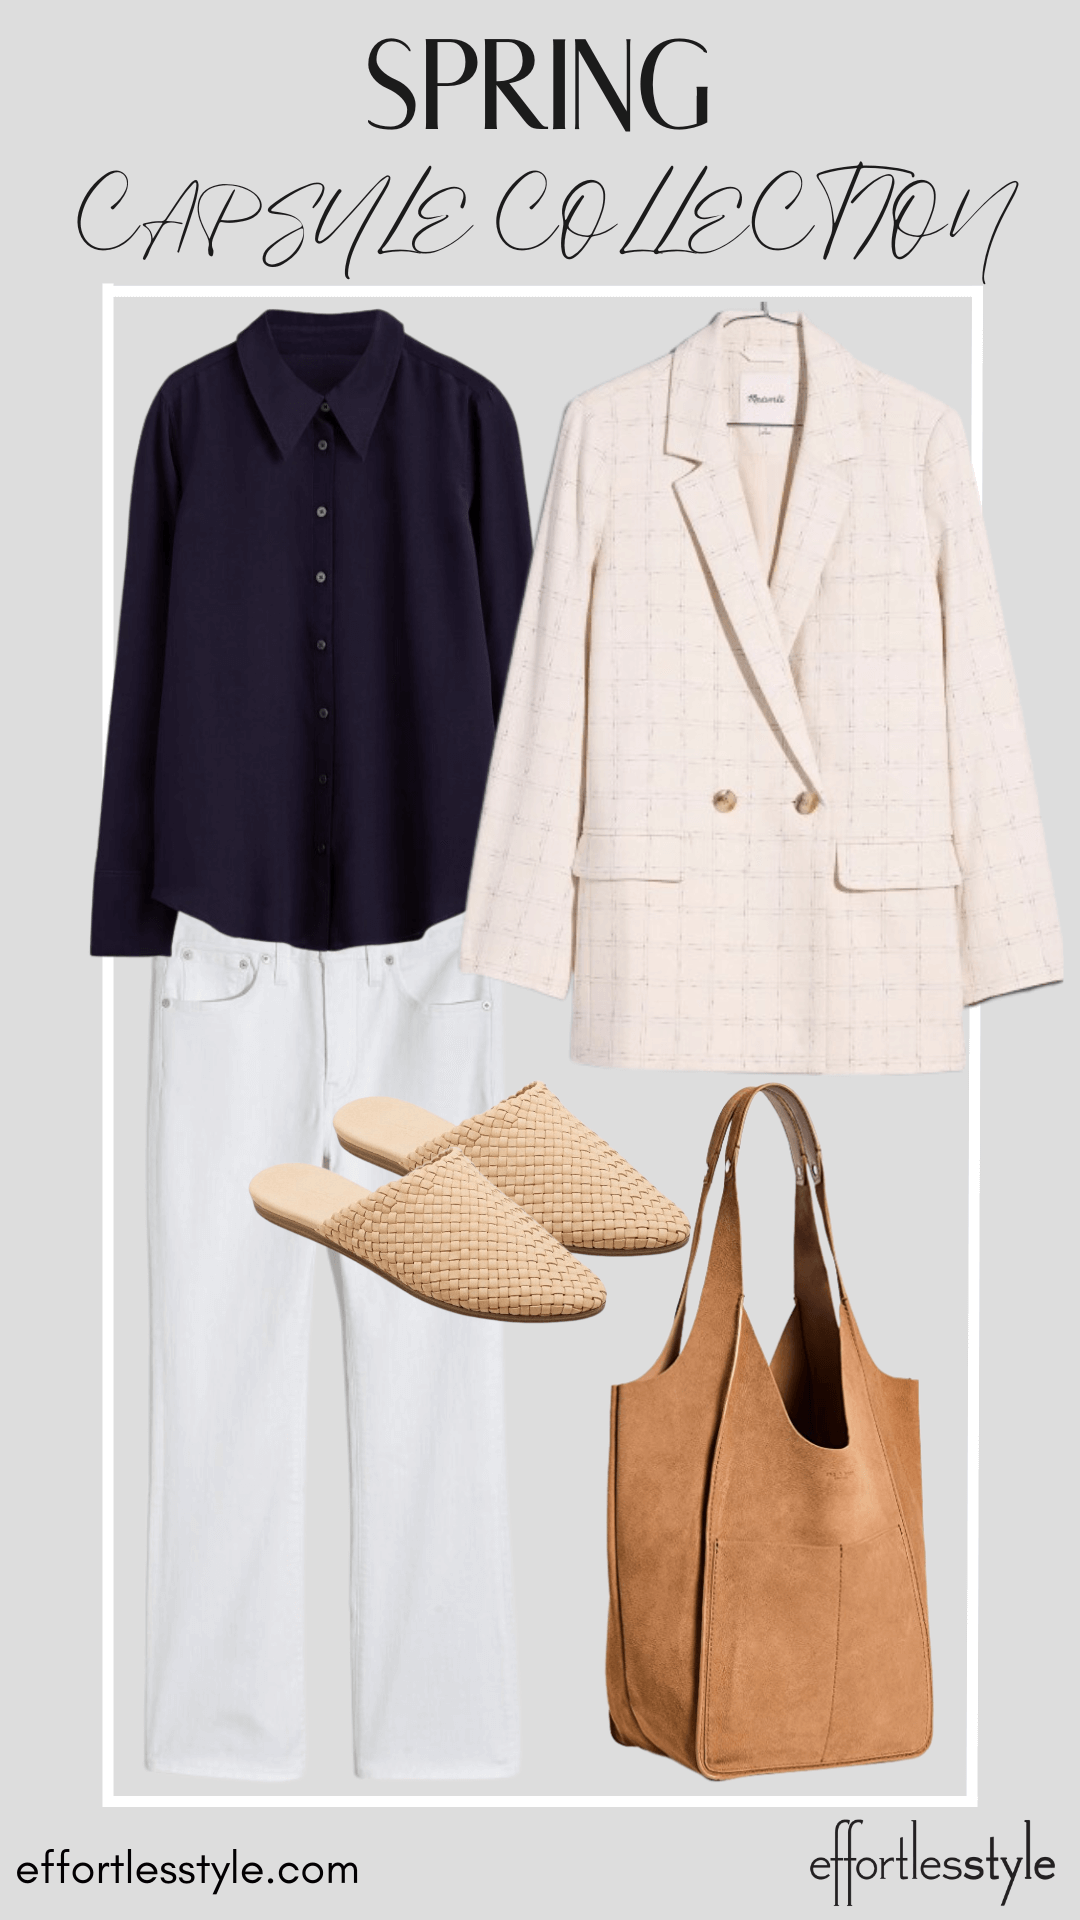 How To Wear Our Spring Capsule Wardrobe - Part 1 Neutral Blazer & Solid Blouse & White Jeans how to wear white jeans to work how to style a blazer with white jeans for the office personal stylists share wardrobe essentials for spring